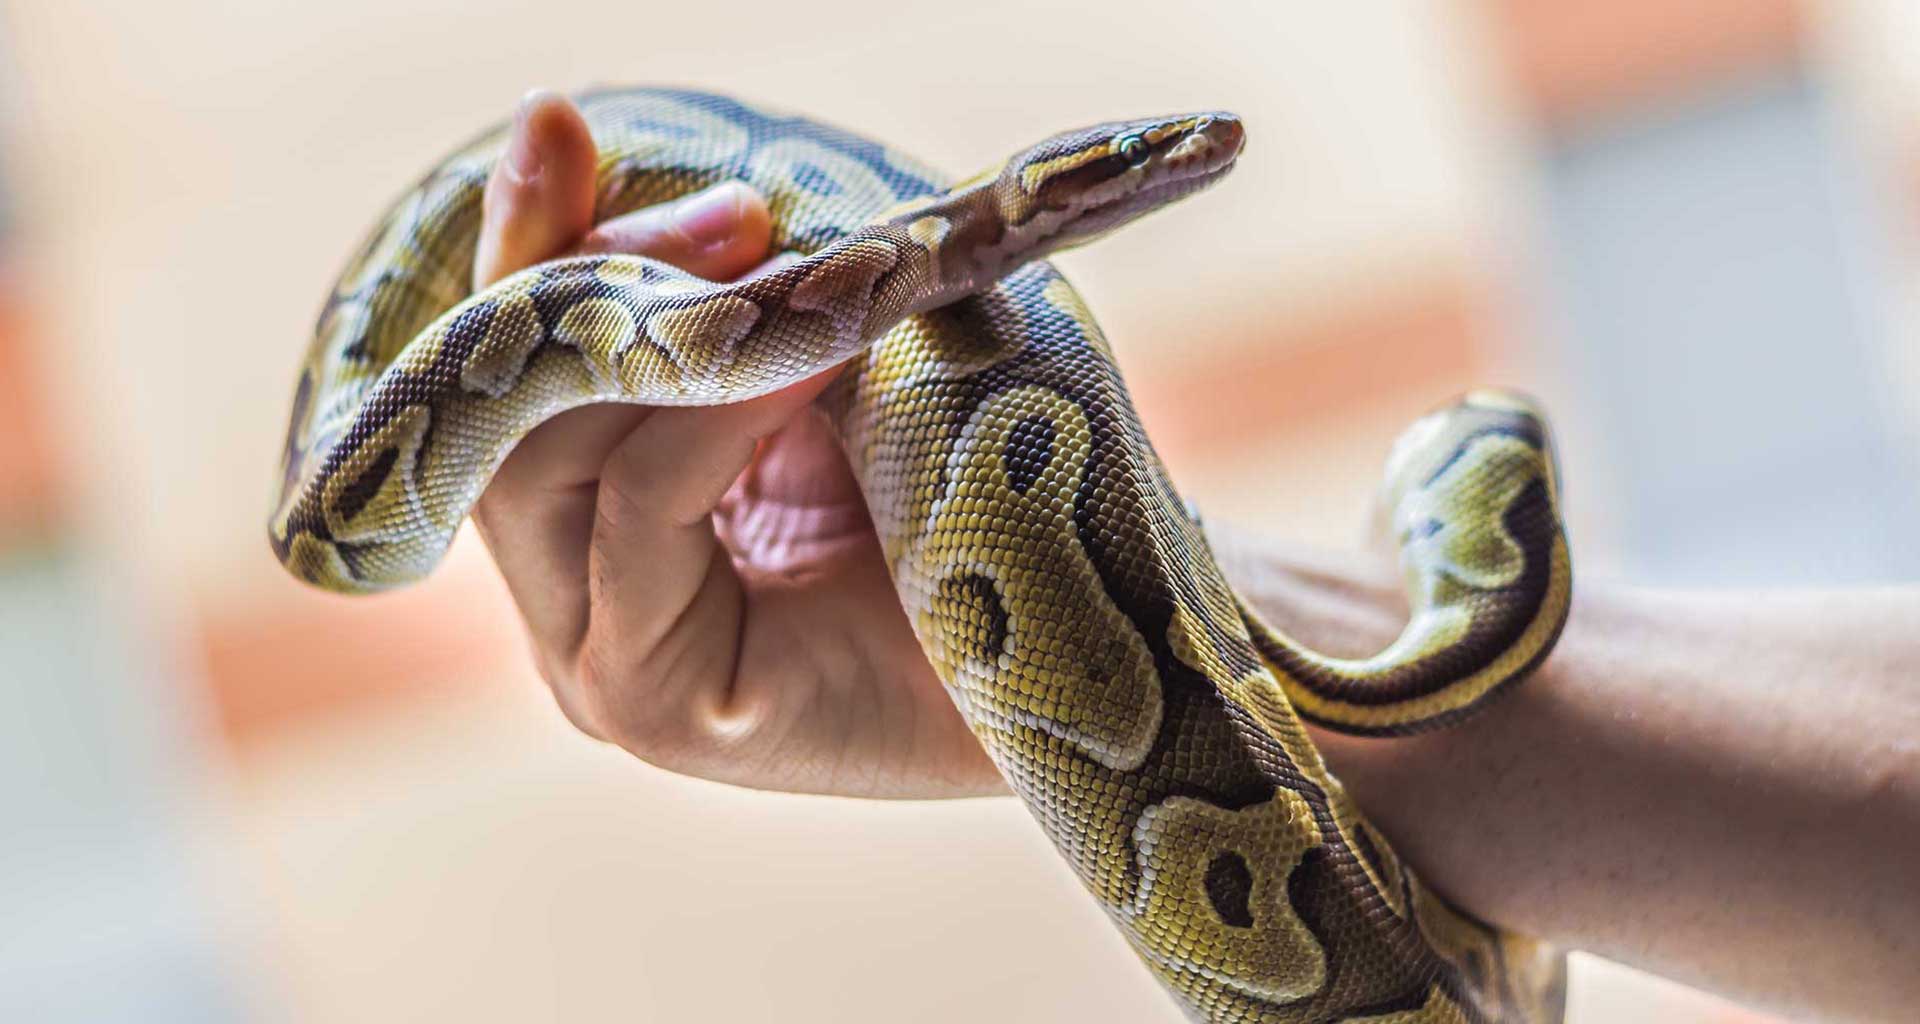 Snake bite and your pet